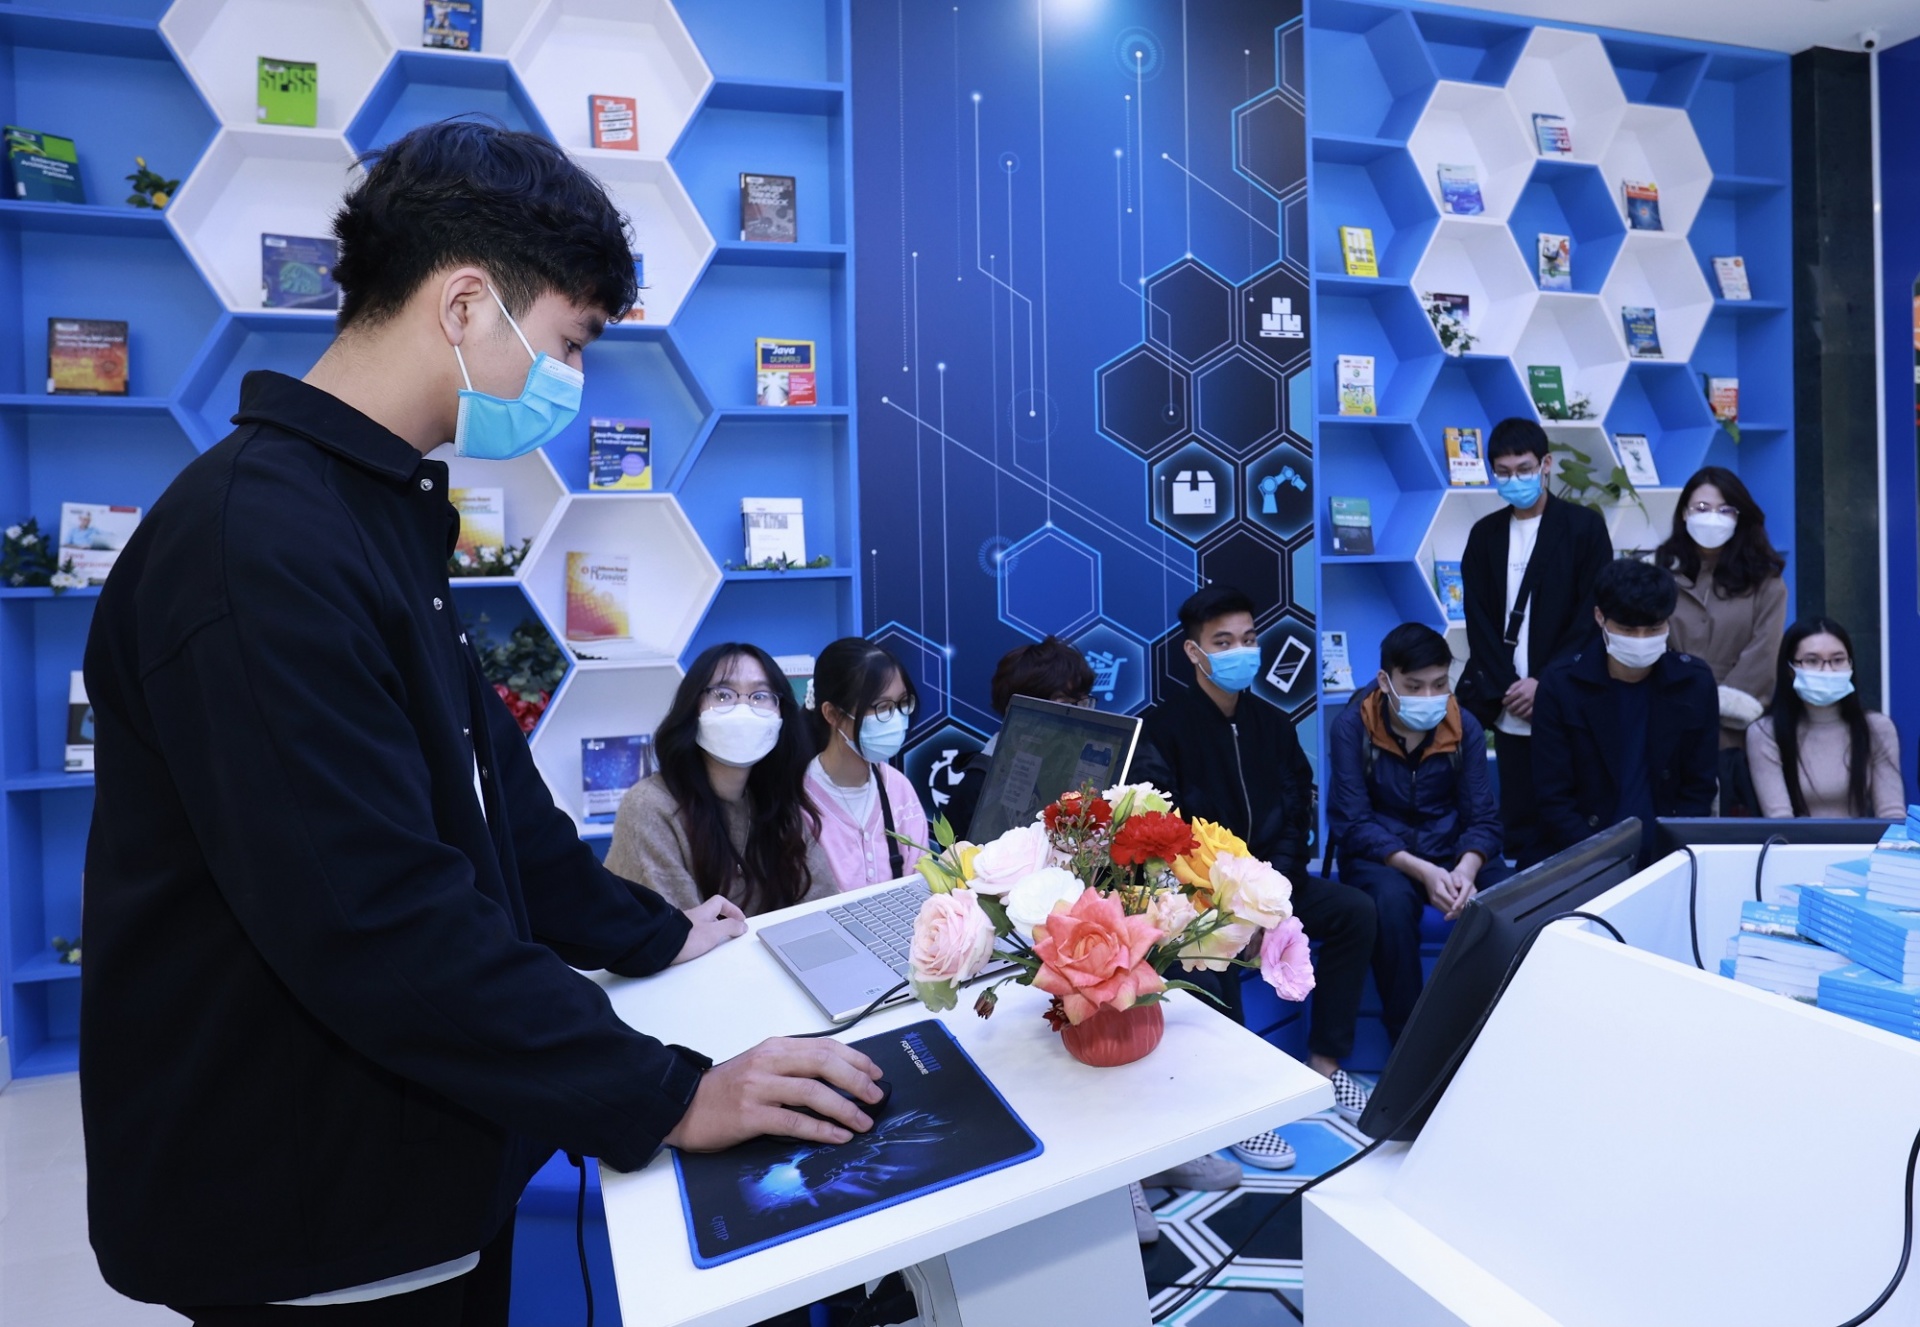 BAV - MB Digital Hub: Top-notch digital banking experience space for Banking Academy students